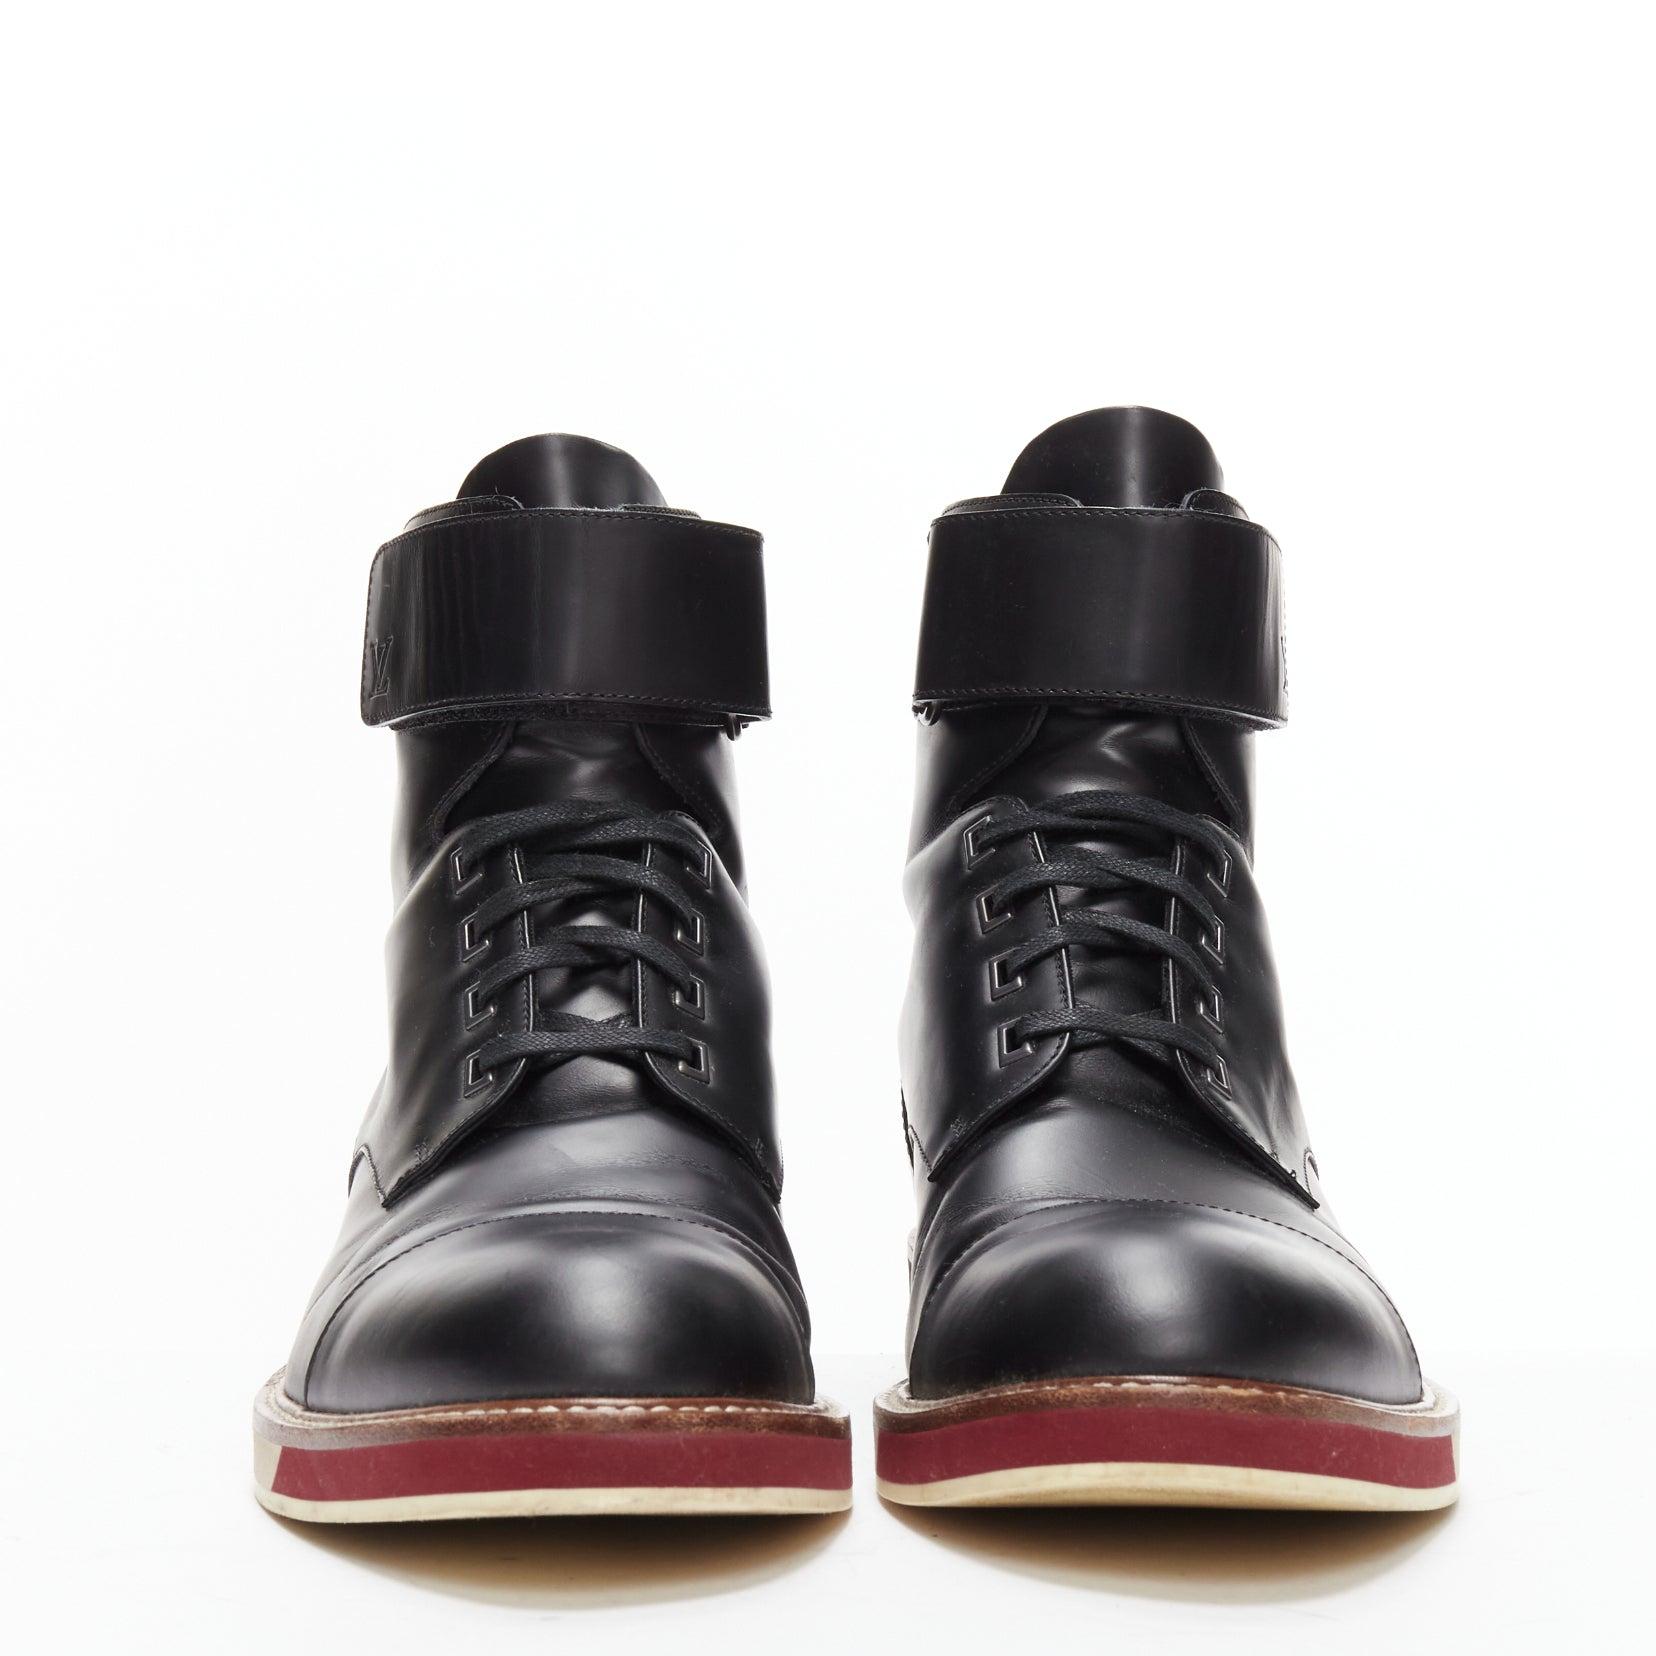 LOUIS VUITTON Sword black leather LV logo hiking lace up boots UK7.5 EU41.5 In Good Condition For Sale In Hong Kong, NT